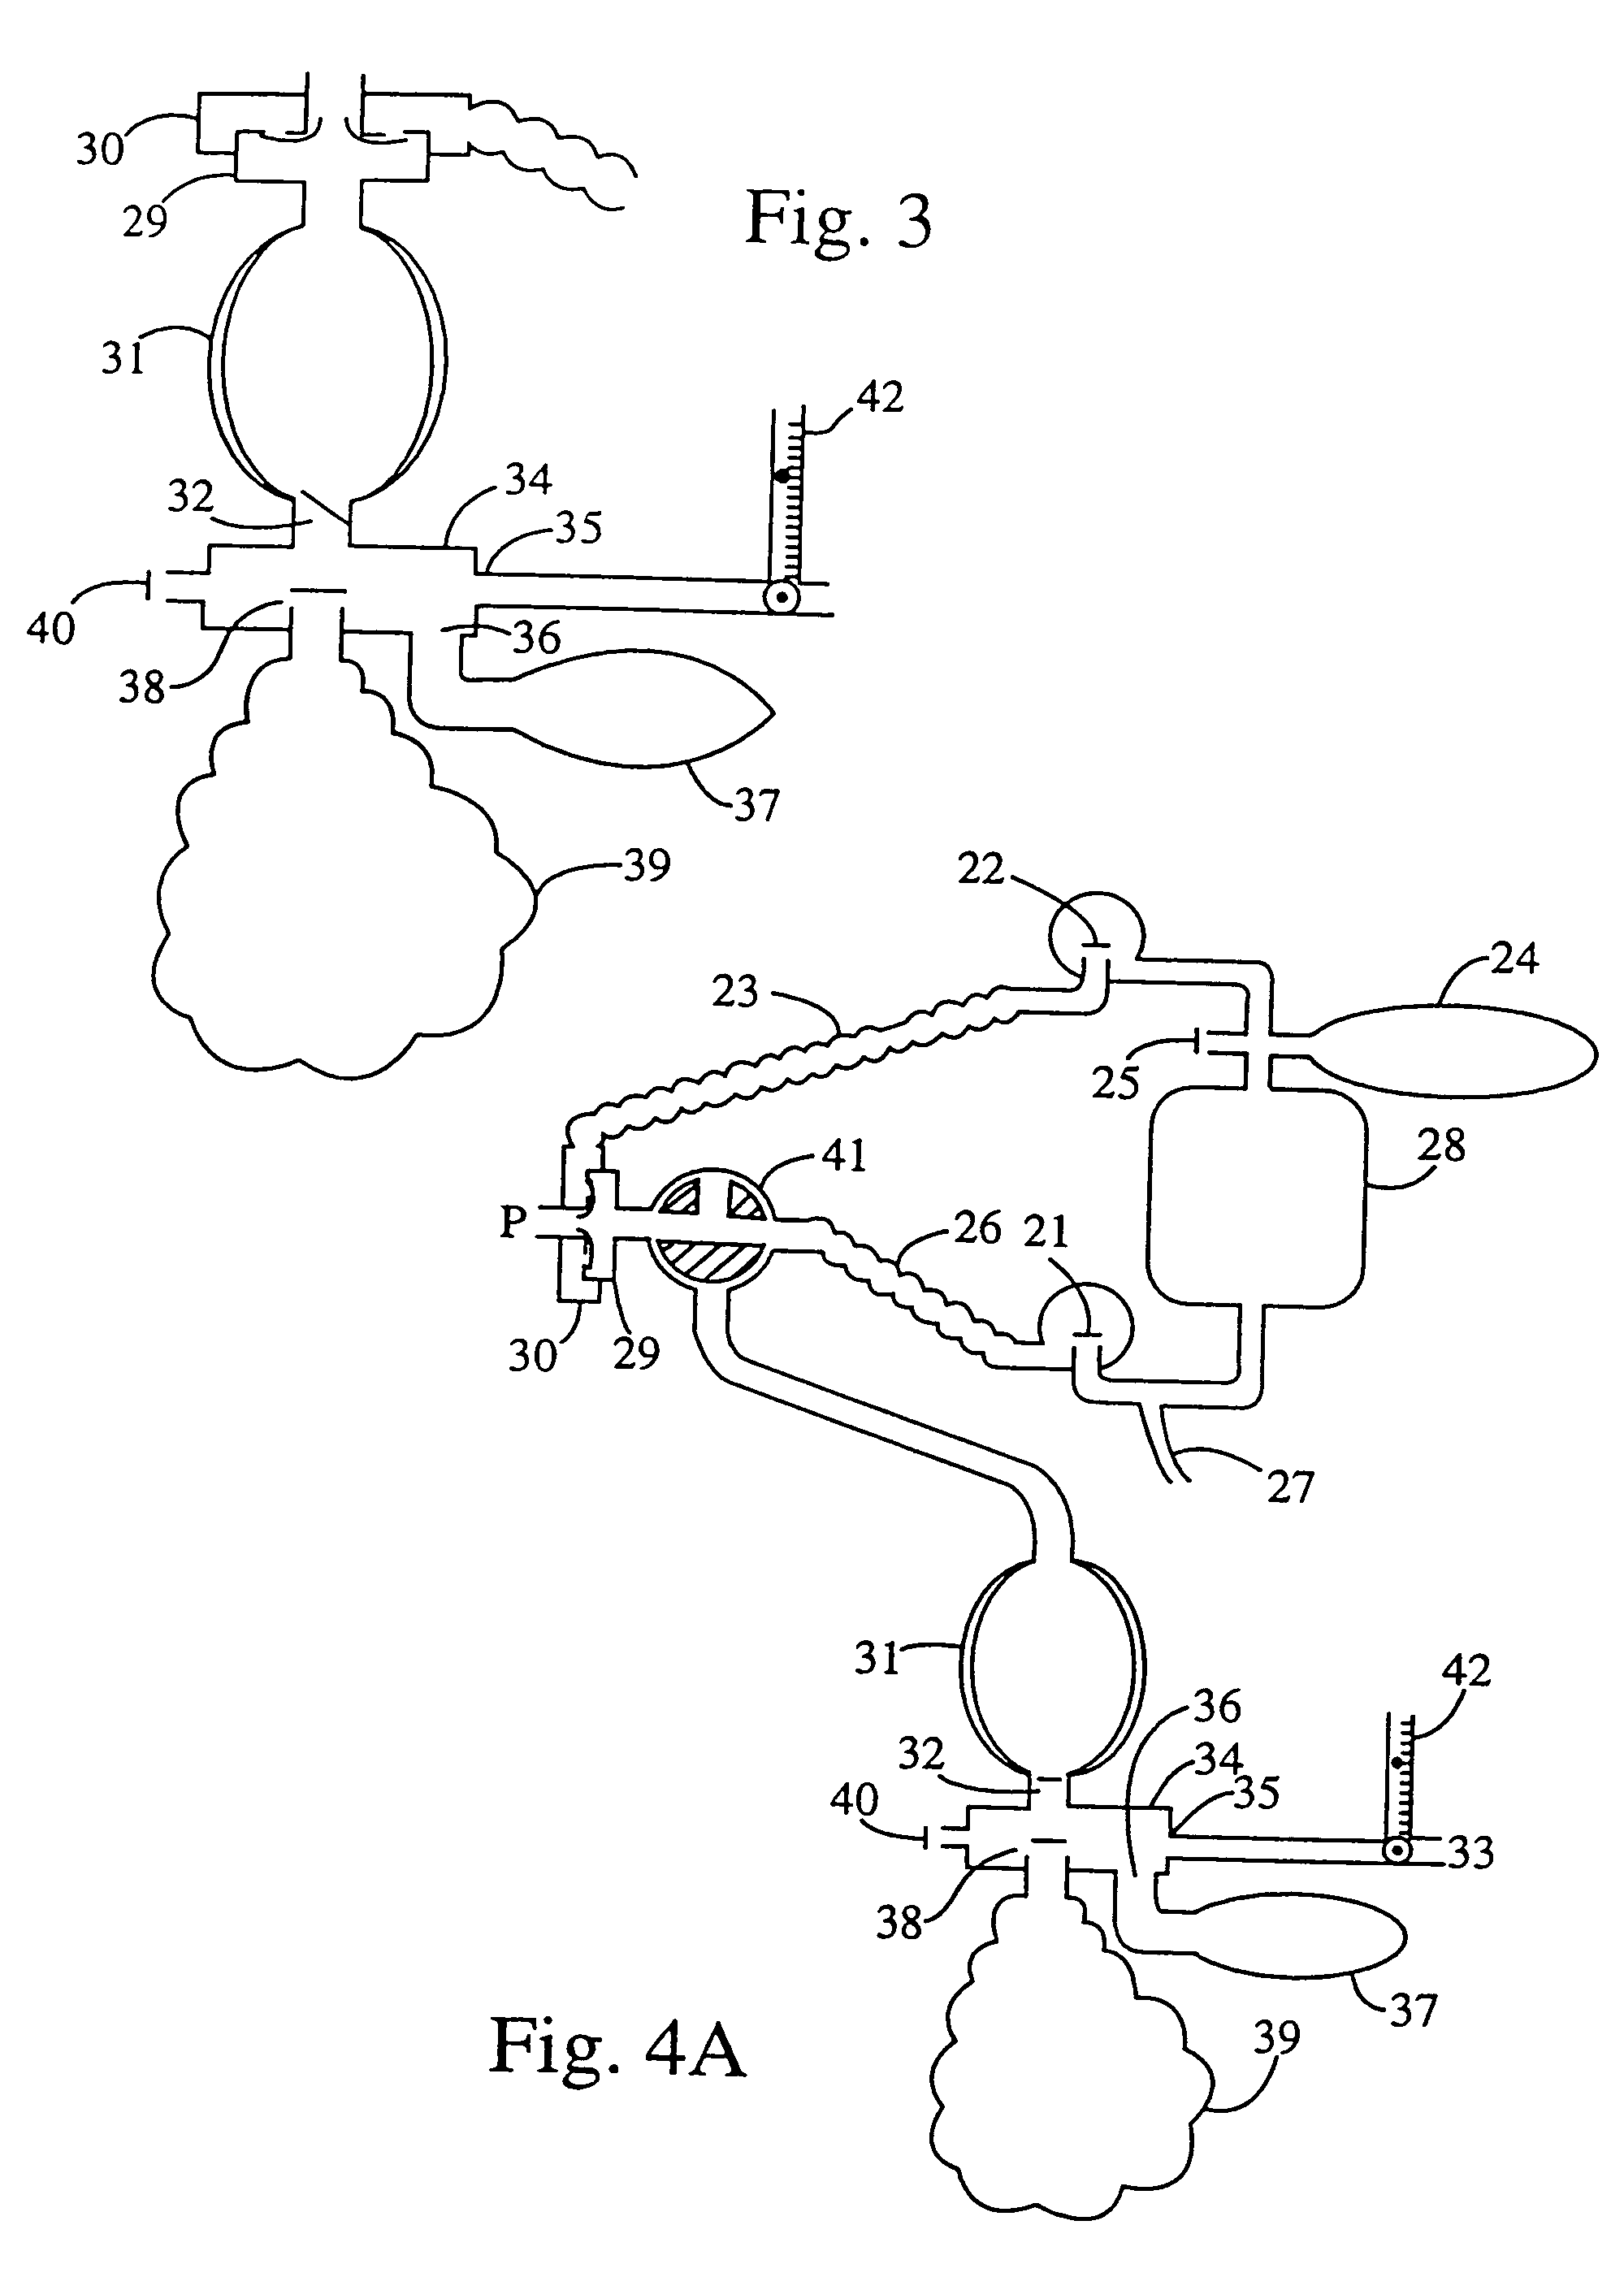 Method of maintaining constant arterial PCO2 and measurement of anatomic and alveolar dead space